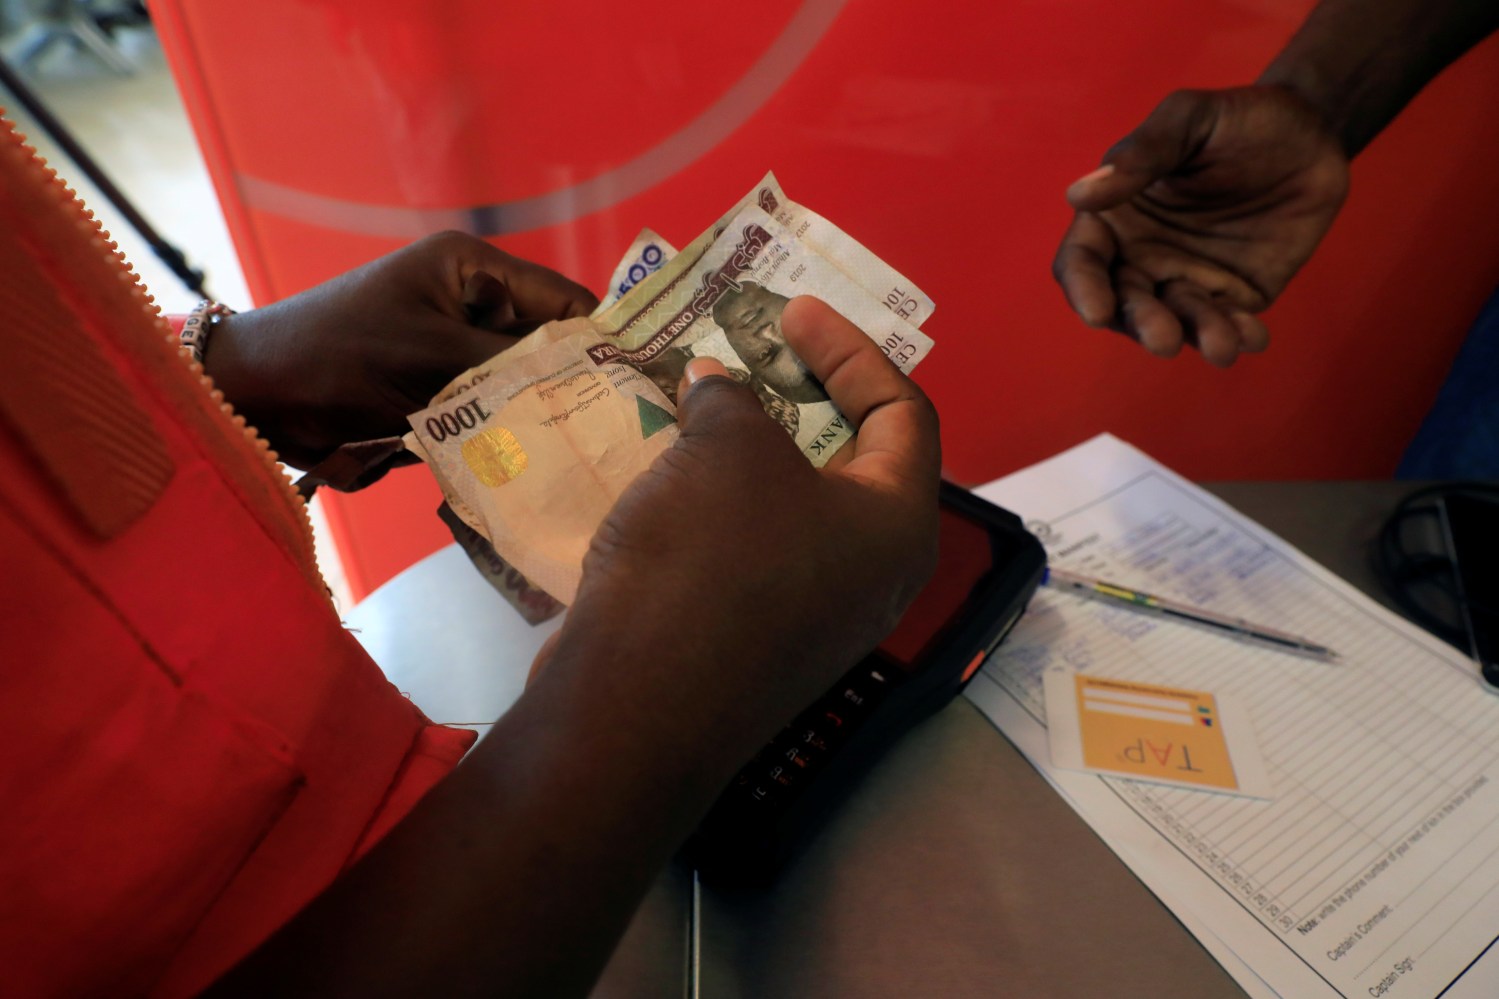 A cashier of the Lagos State Ferry Service (LAGFERRY) counts money from the boat ticket sales at the Five Cowries Terminal in Falomo Lagos, Nigeria February 10, 2020. Picture taken February 10, 2020. REUTERS/Temilade Adelaja